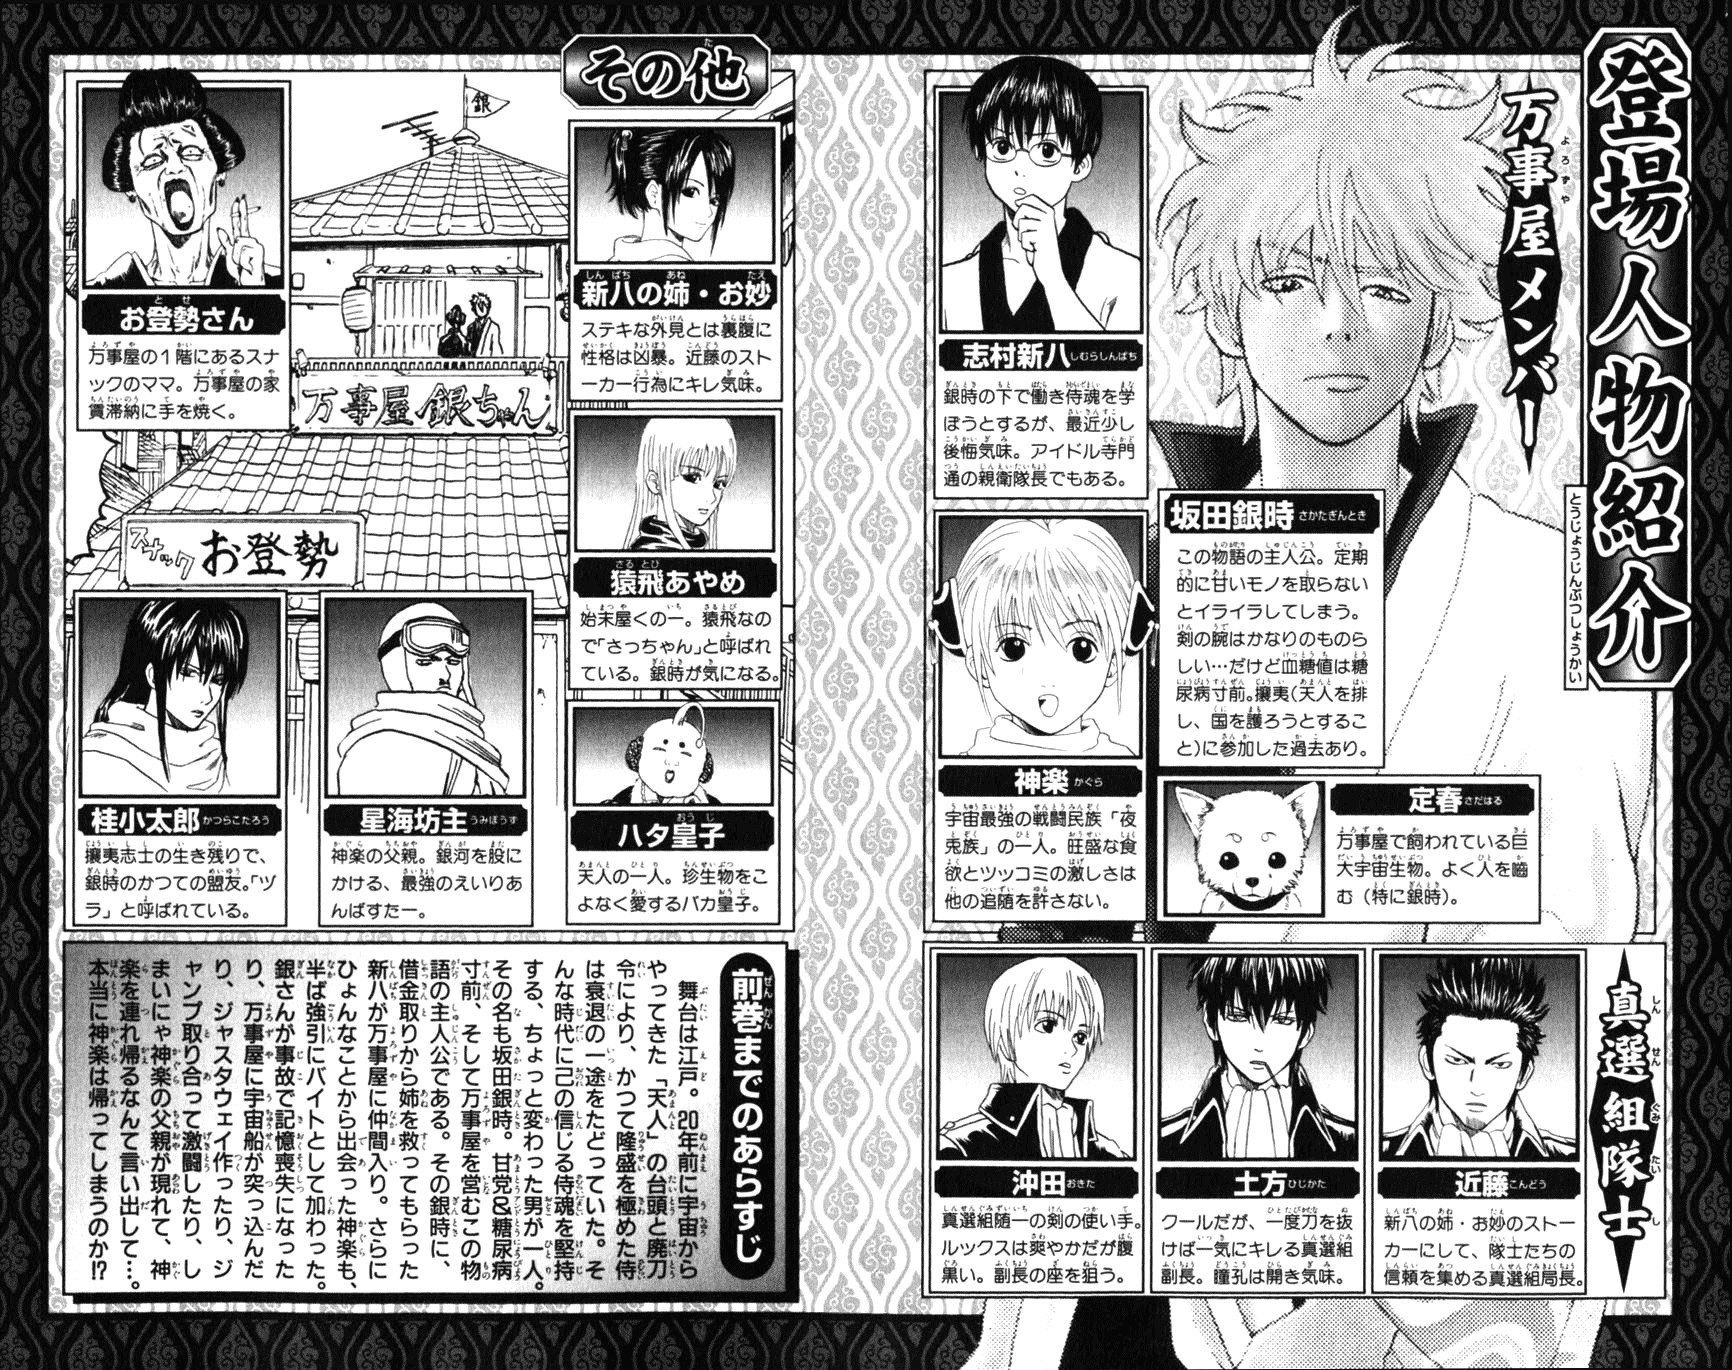 Gintama chapter 59 page 4